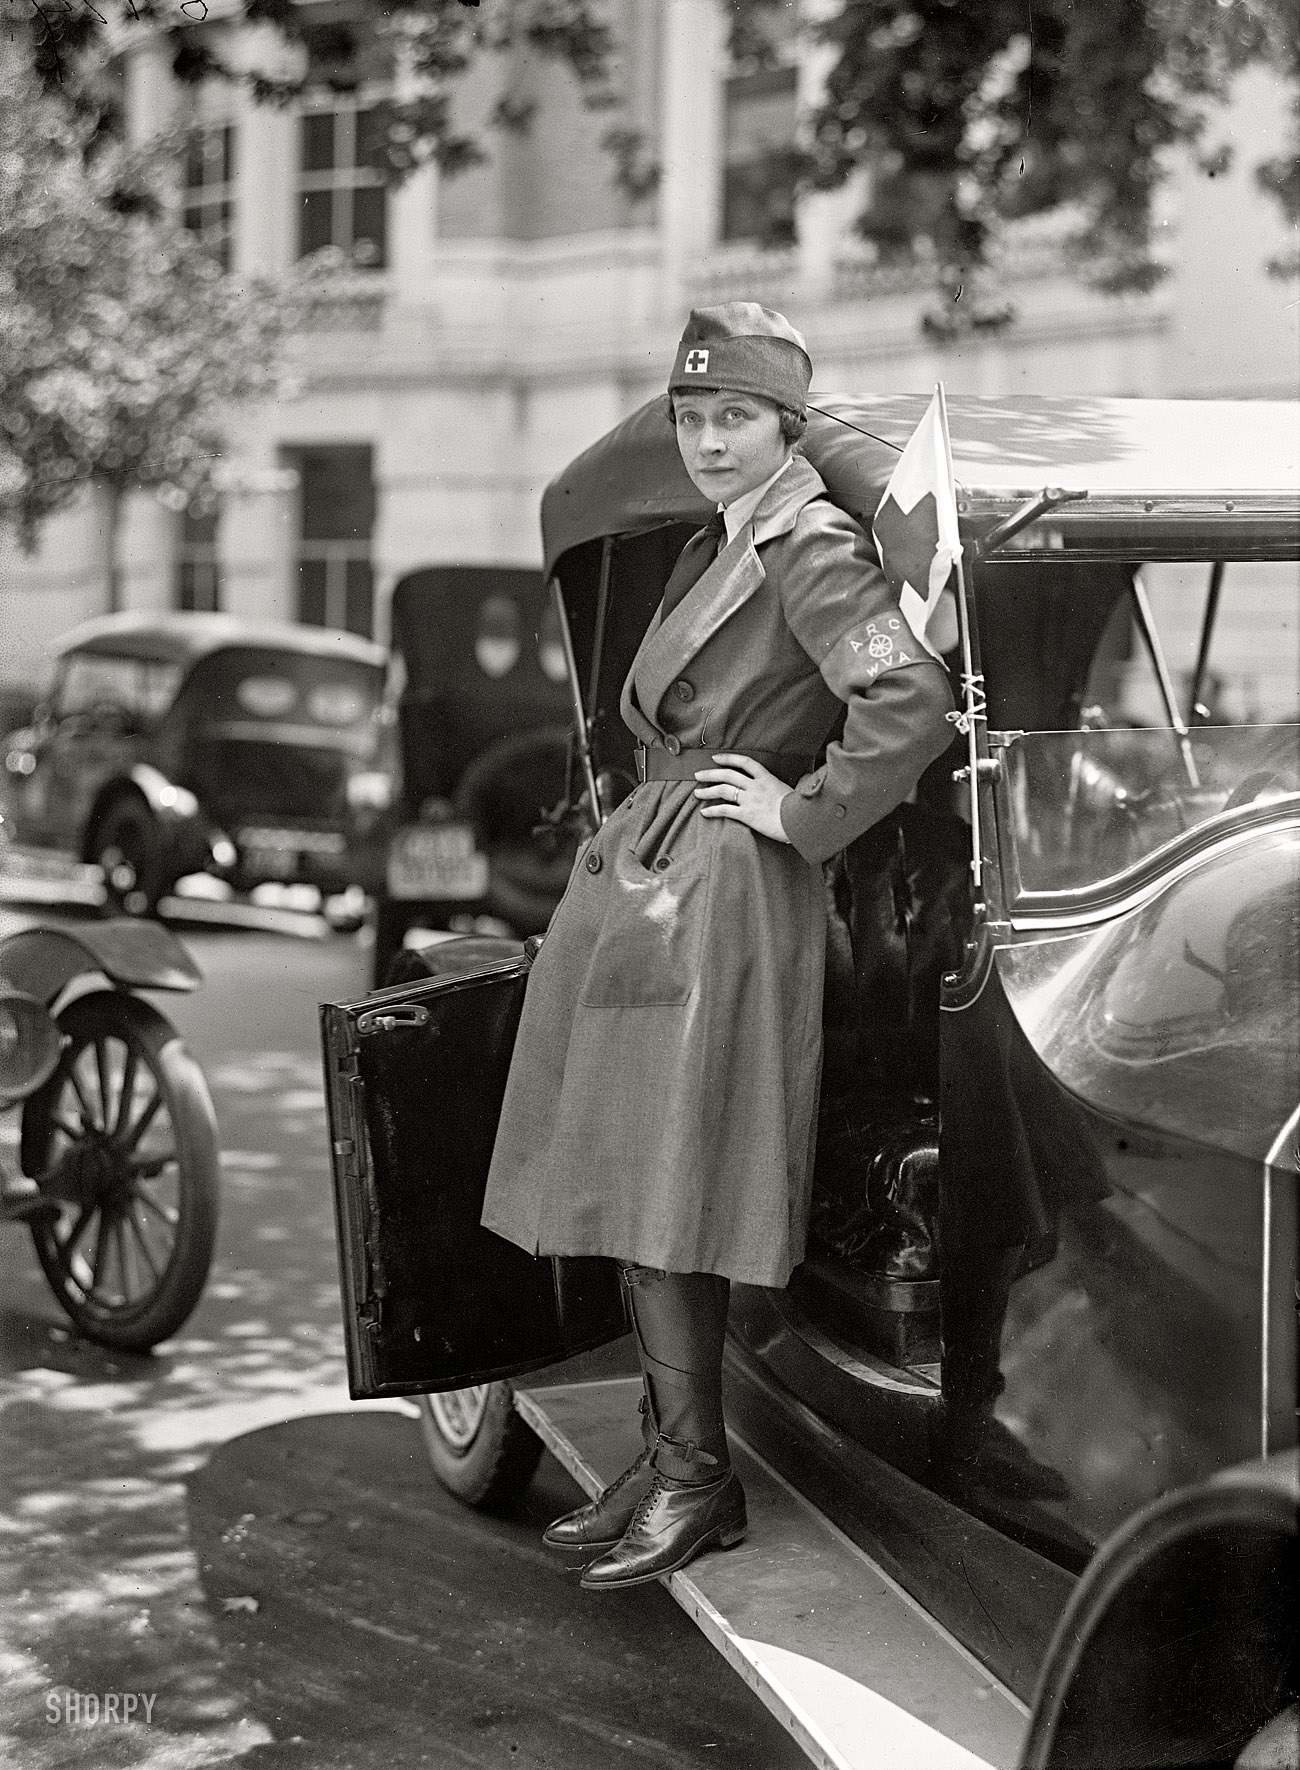 Washington, D.C., 1917. "Red Cross Motor Corps." First aid has arrived, by way of West Virginia. Harris & Ewing Collection glass negative. View full size.